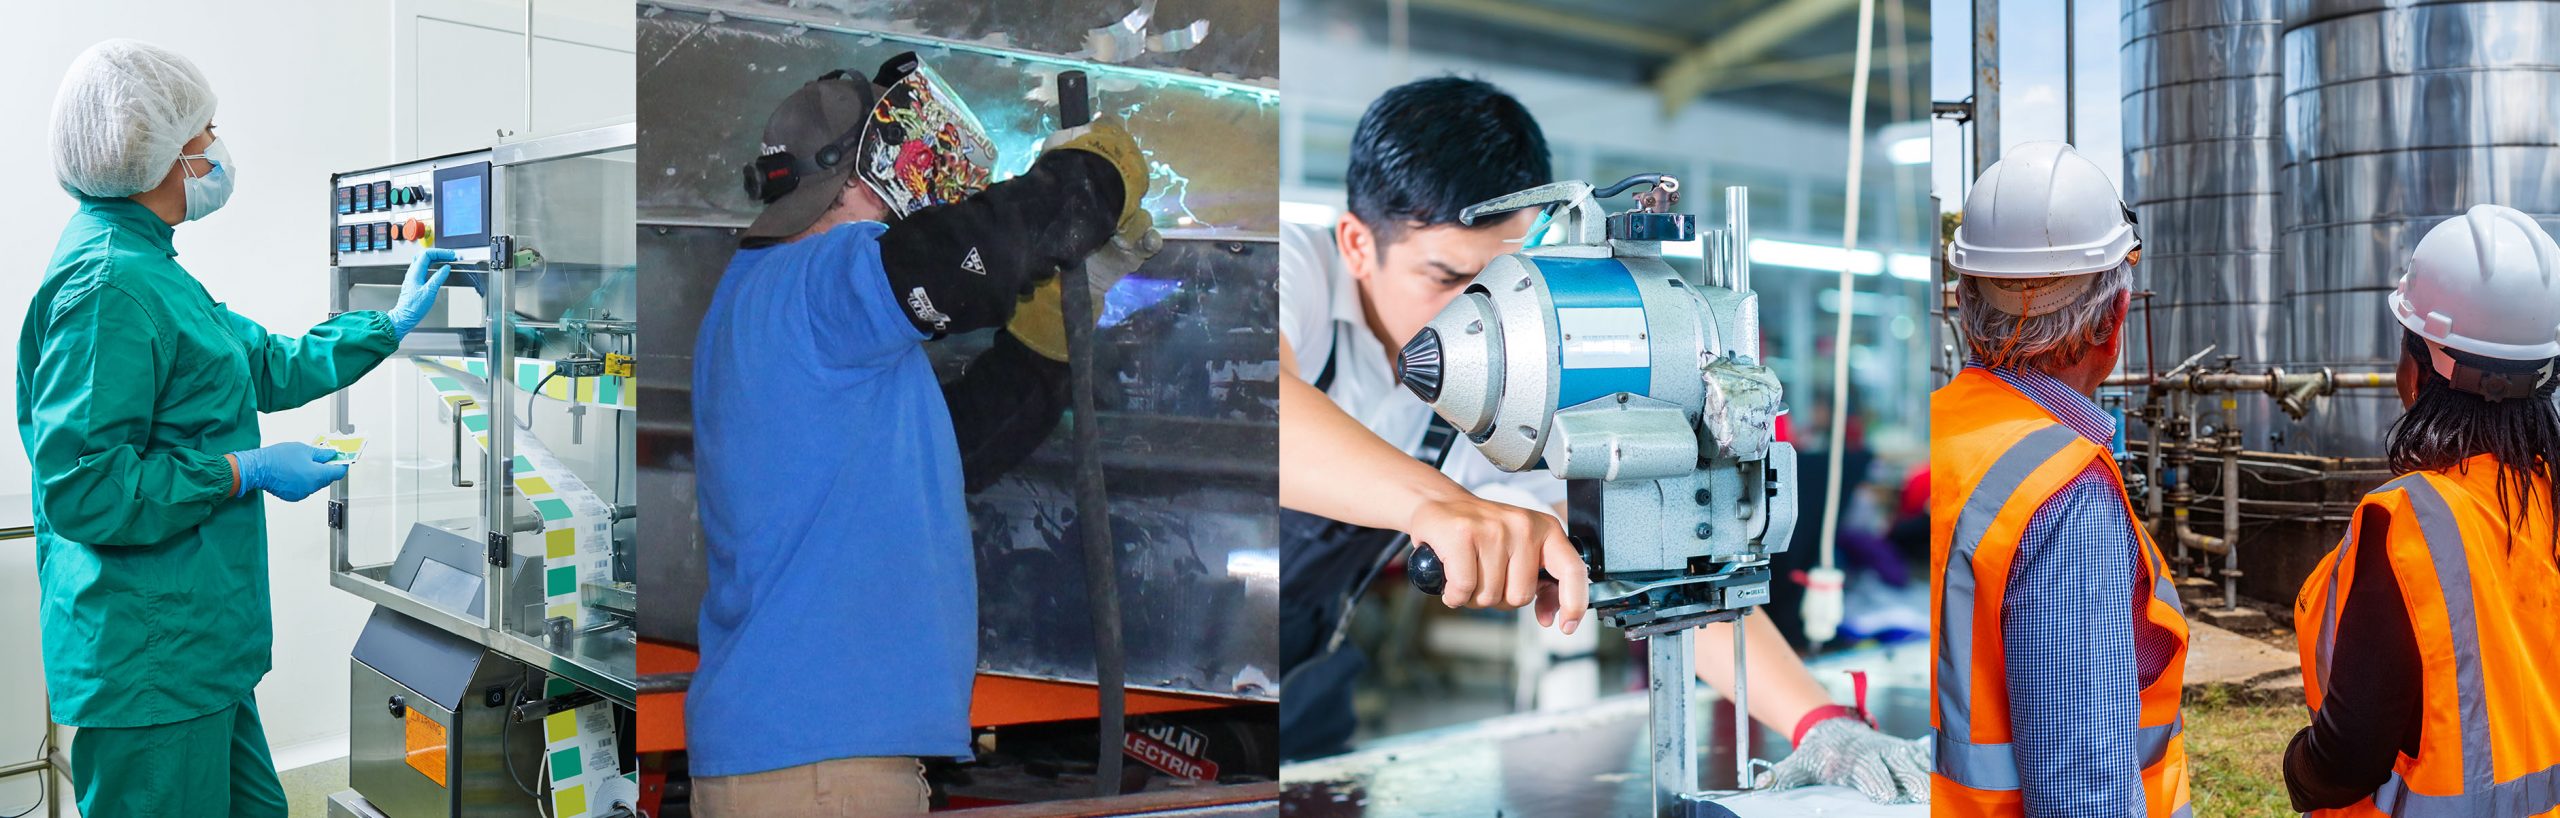 Manufacturing employees working in factories